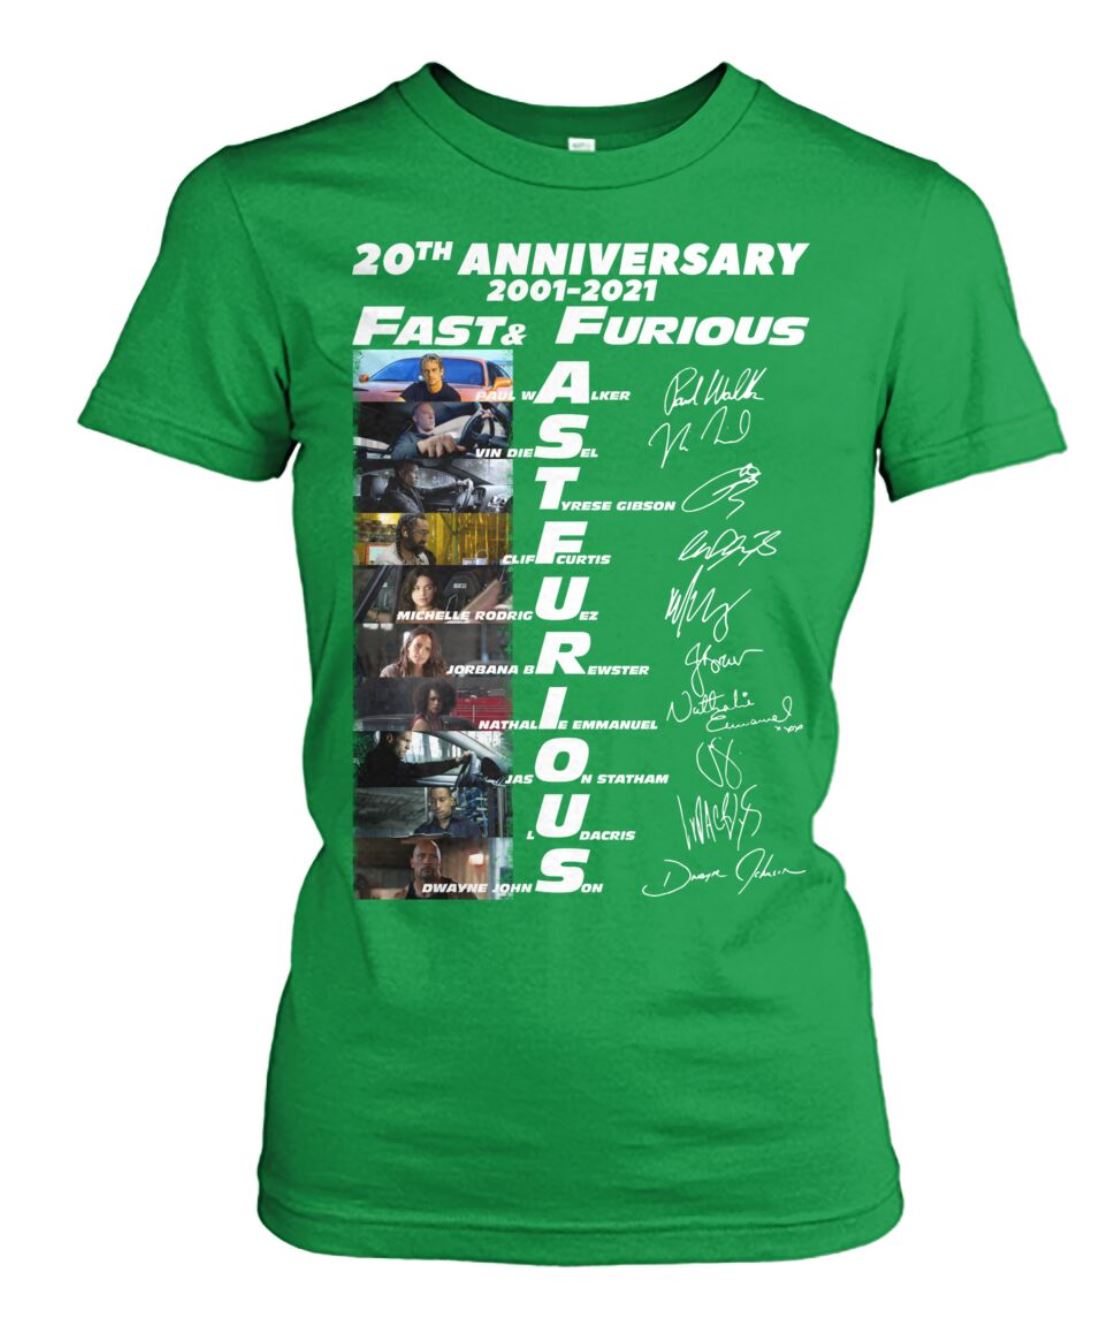 20th anniversary fast and furious lady shirt